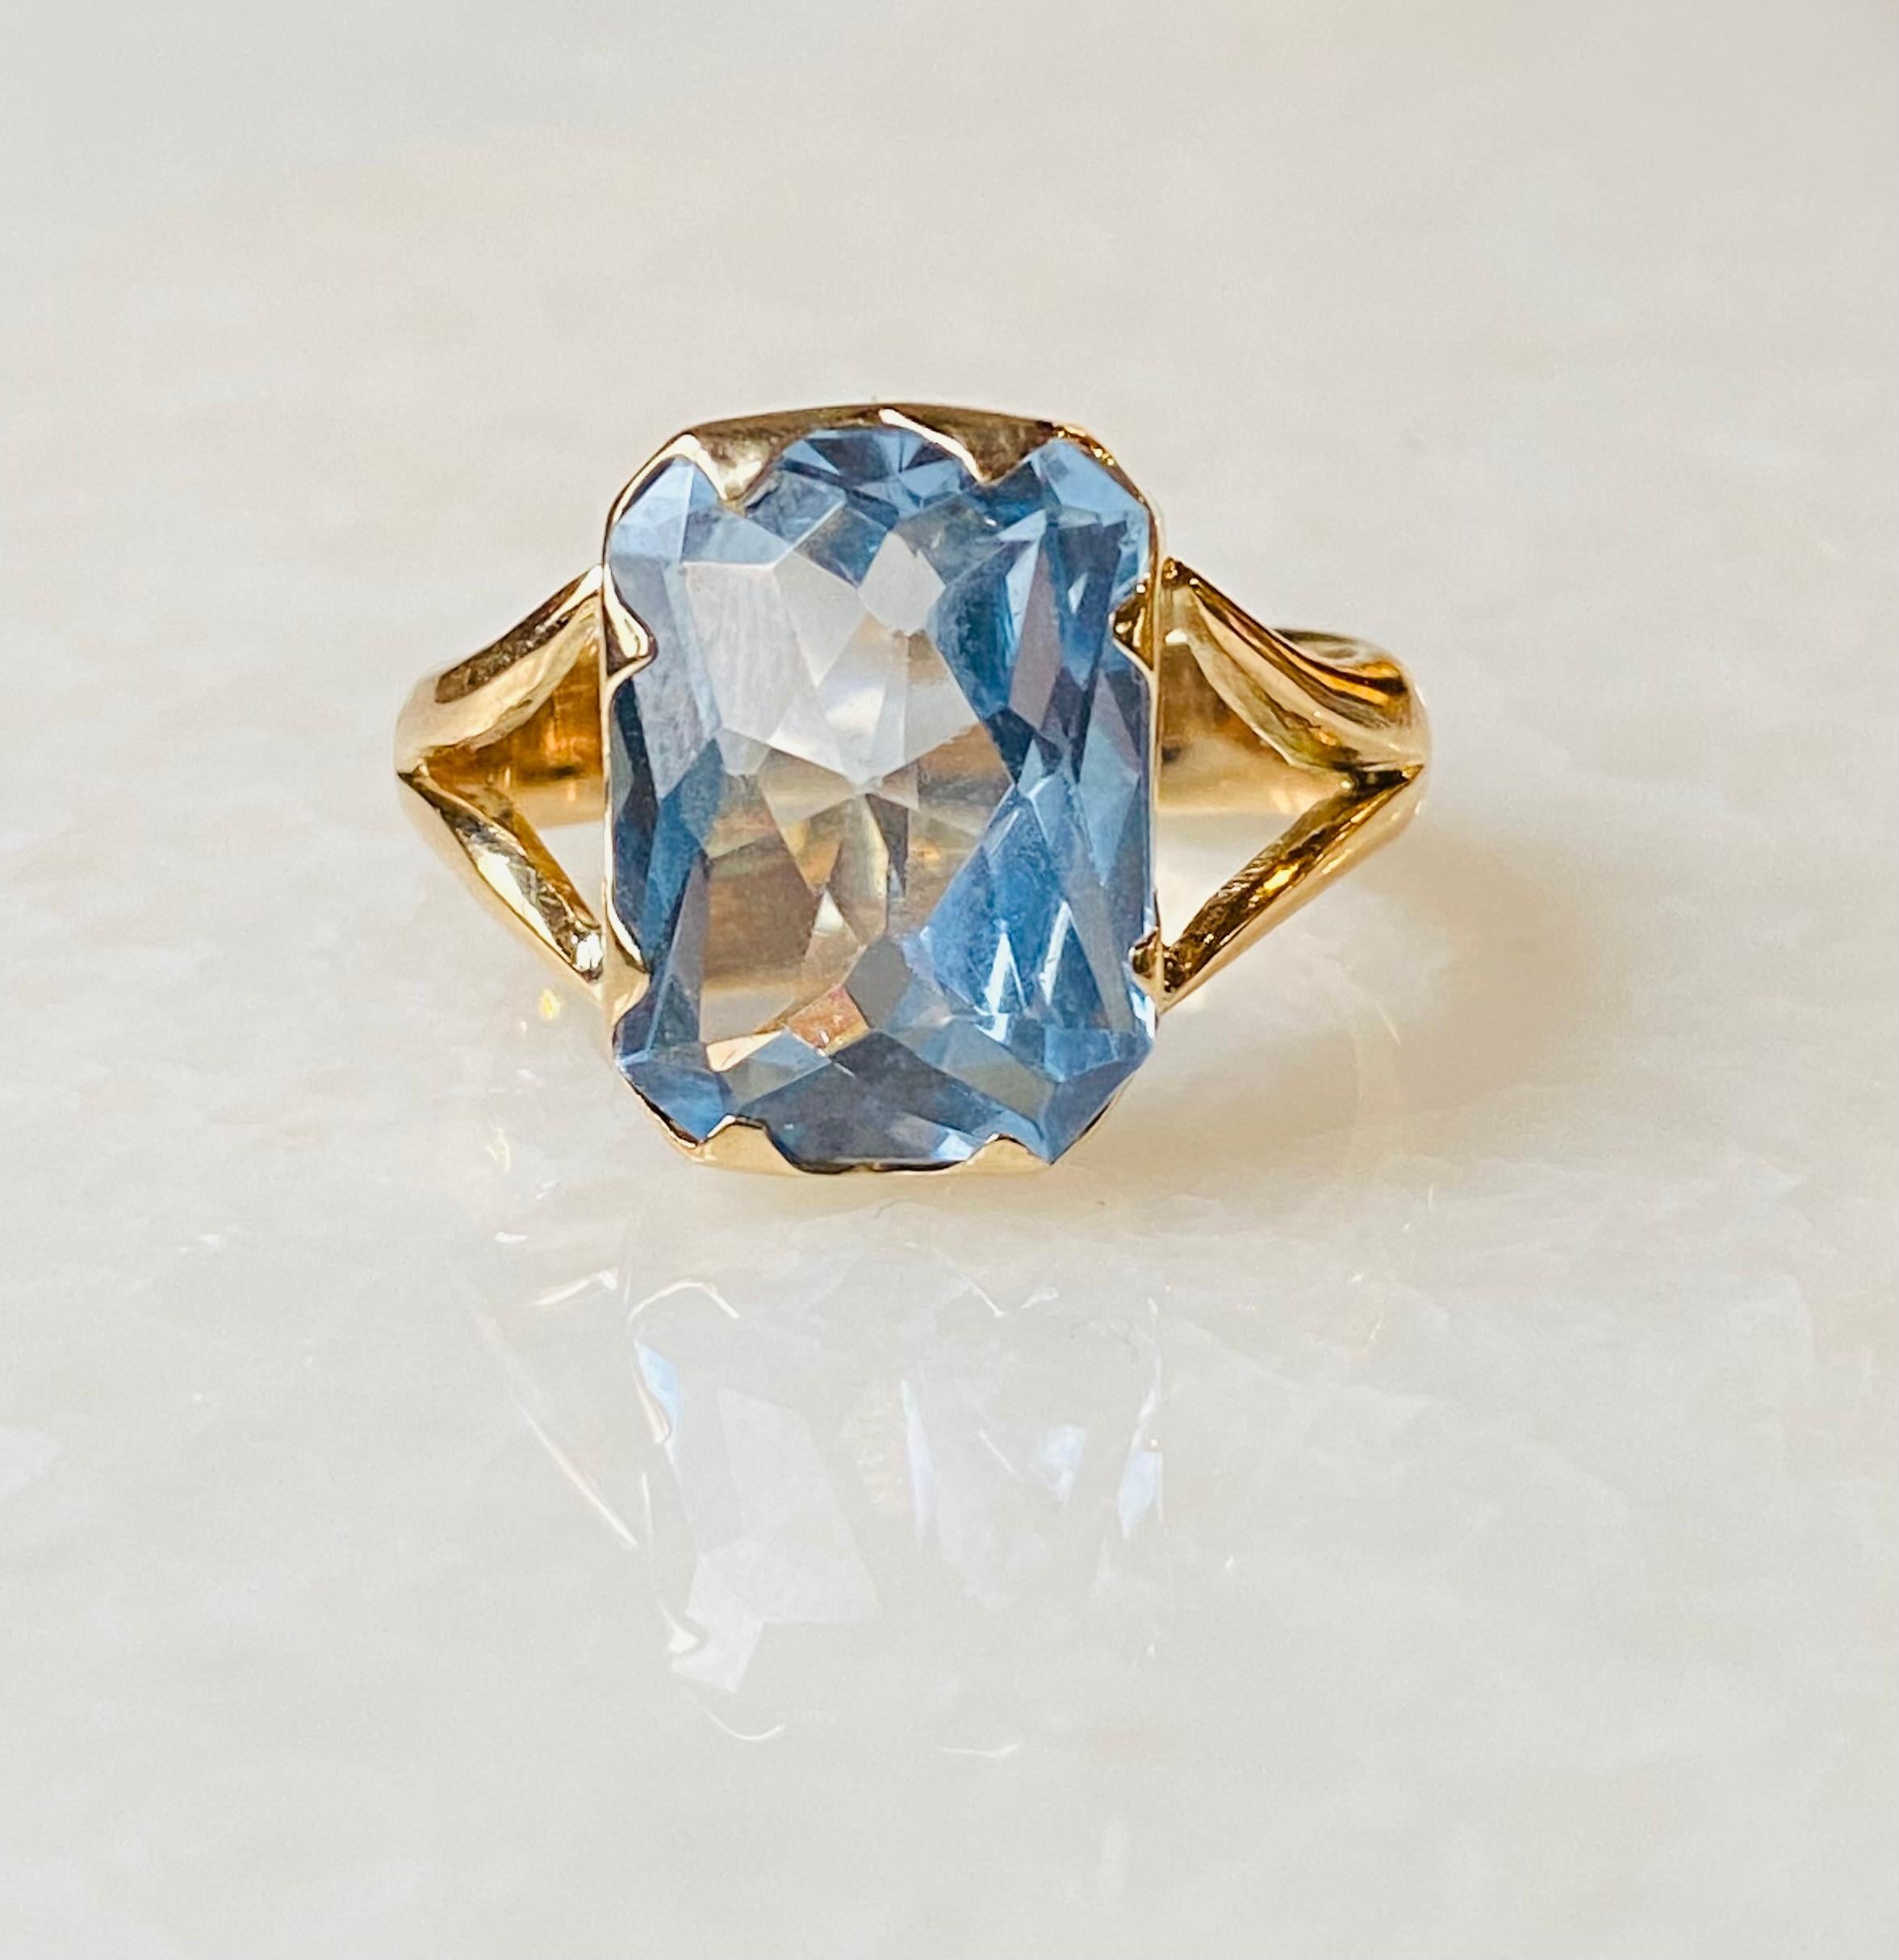 This antique 18 carat golden ring has a truly beautiful faceted aquamarine. This gemstone is double faceted in 8 sides. And the color of this gem is absolutely stunning and shows an enchanting color spectrum and vibrant hue. The aquamarine is set in